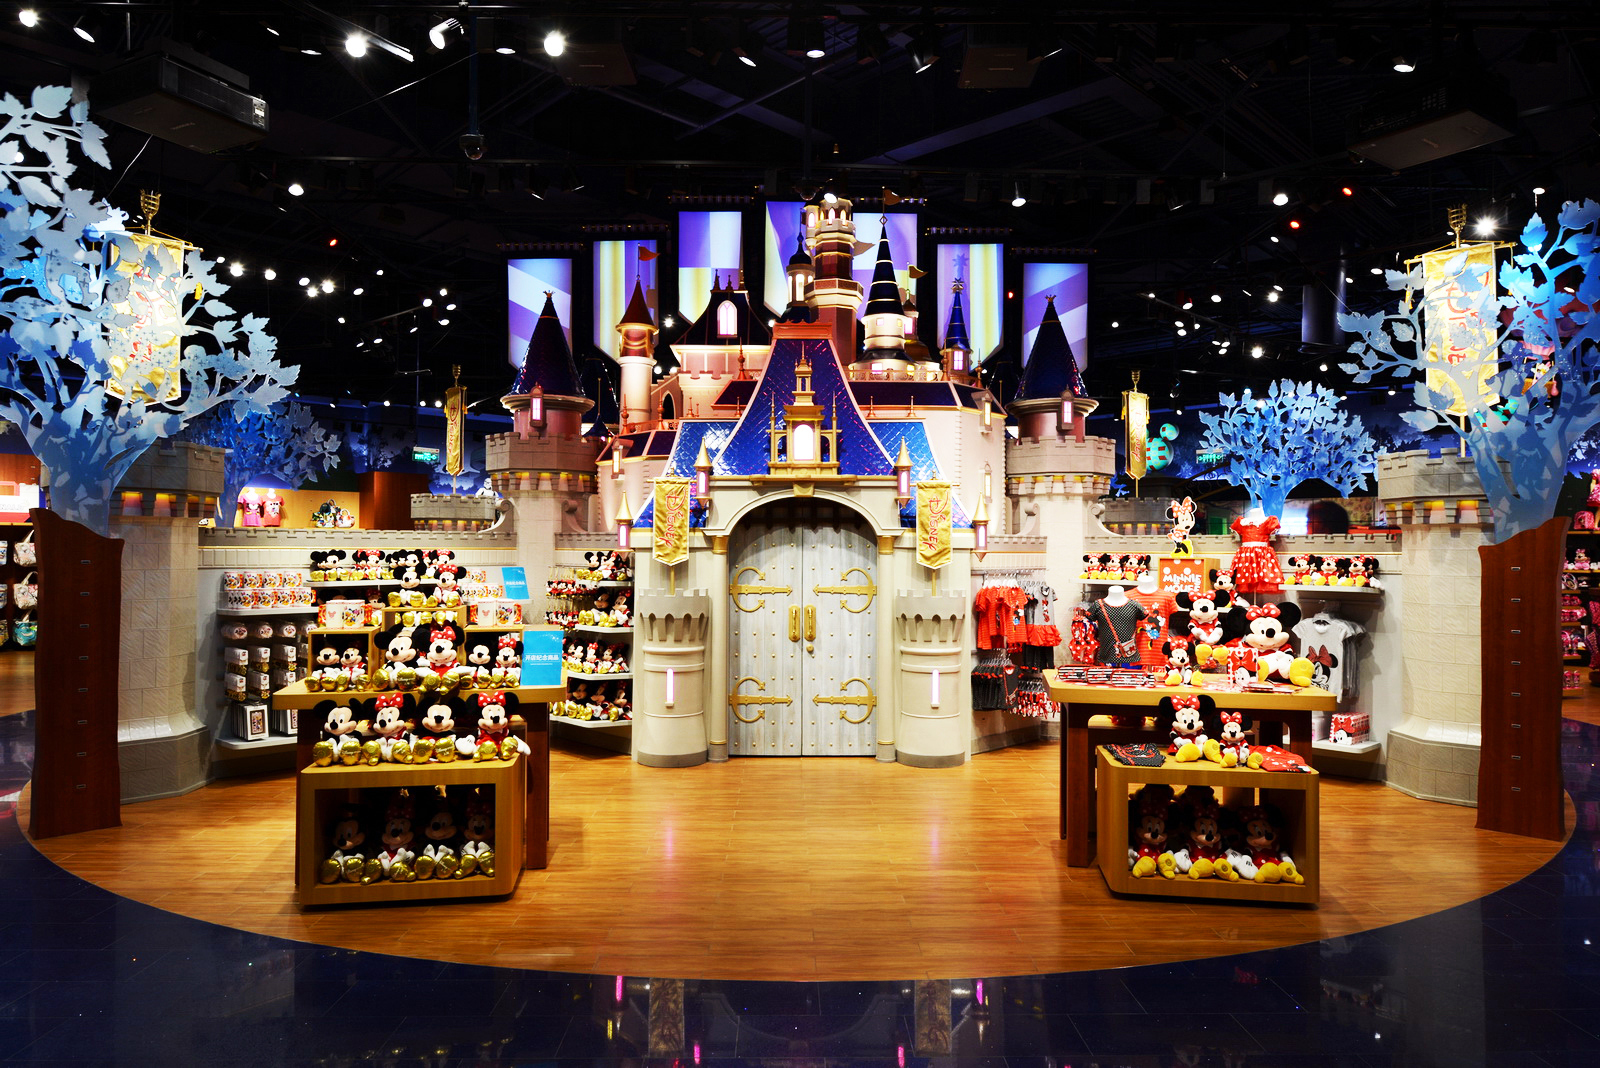 Which Disney Character Are You? Disney store